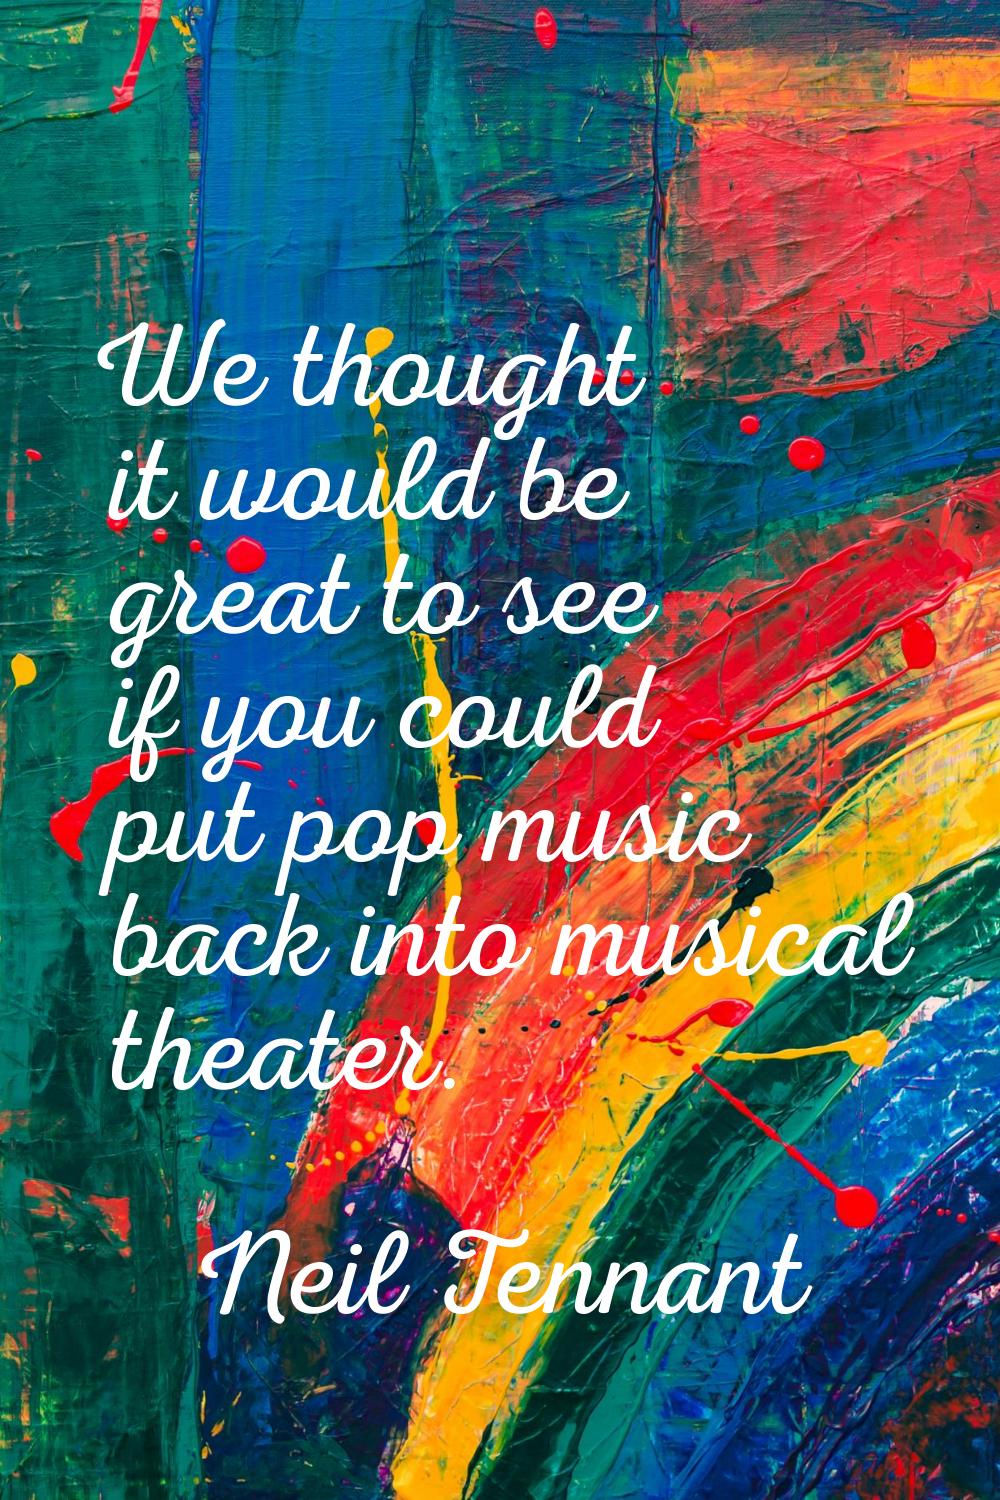 We thought it would be great to see if you could put pop music back into musical theater.